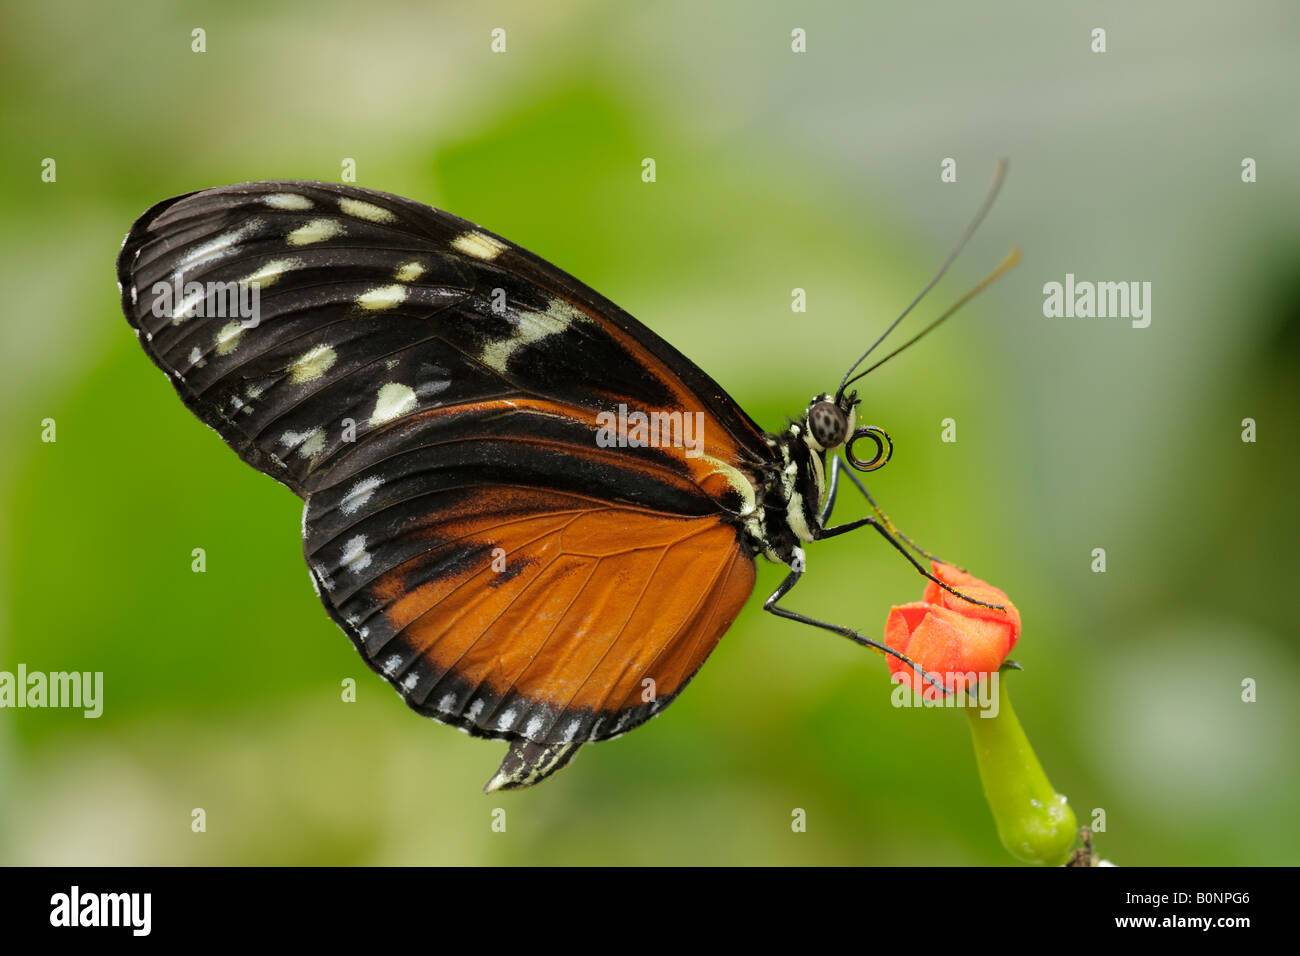 Golden helicon butterfly feeding on flower Note Captive subject Stock Photo